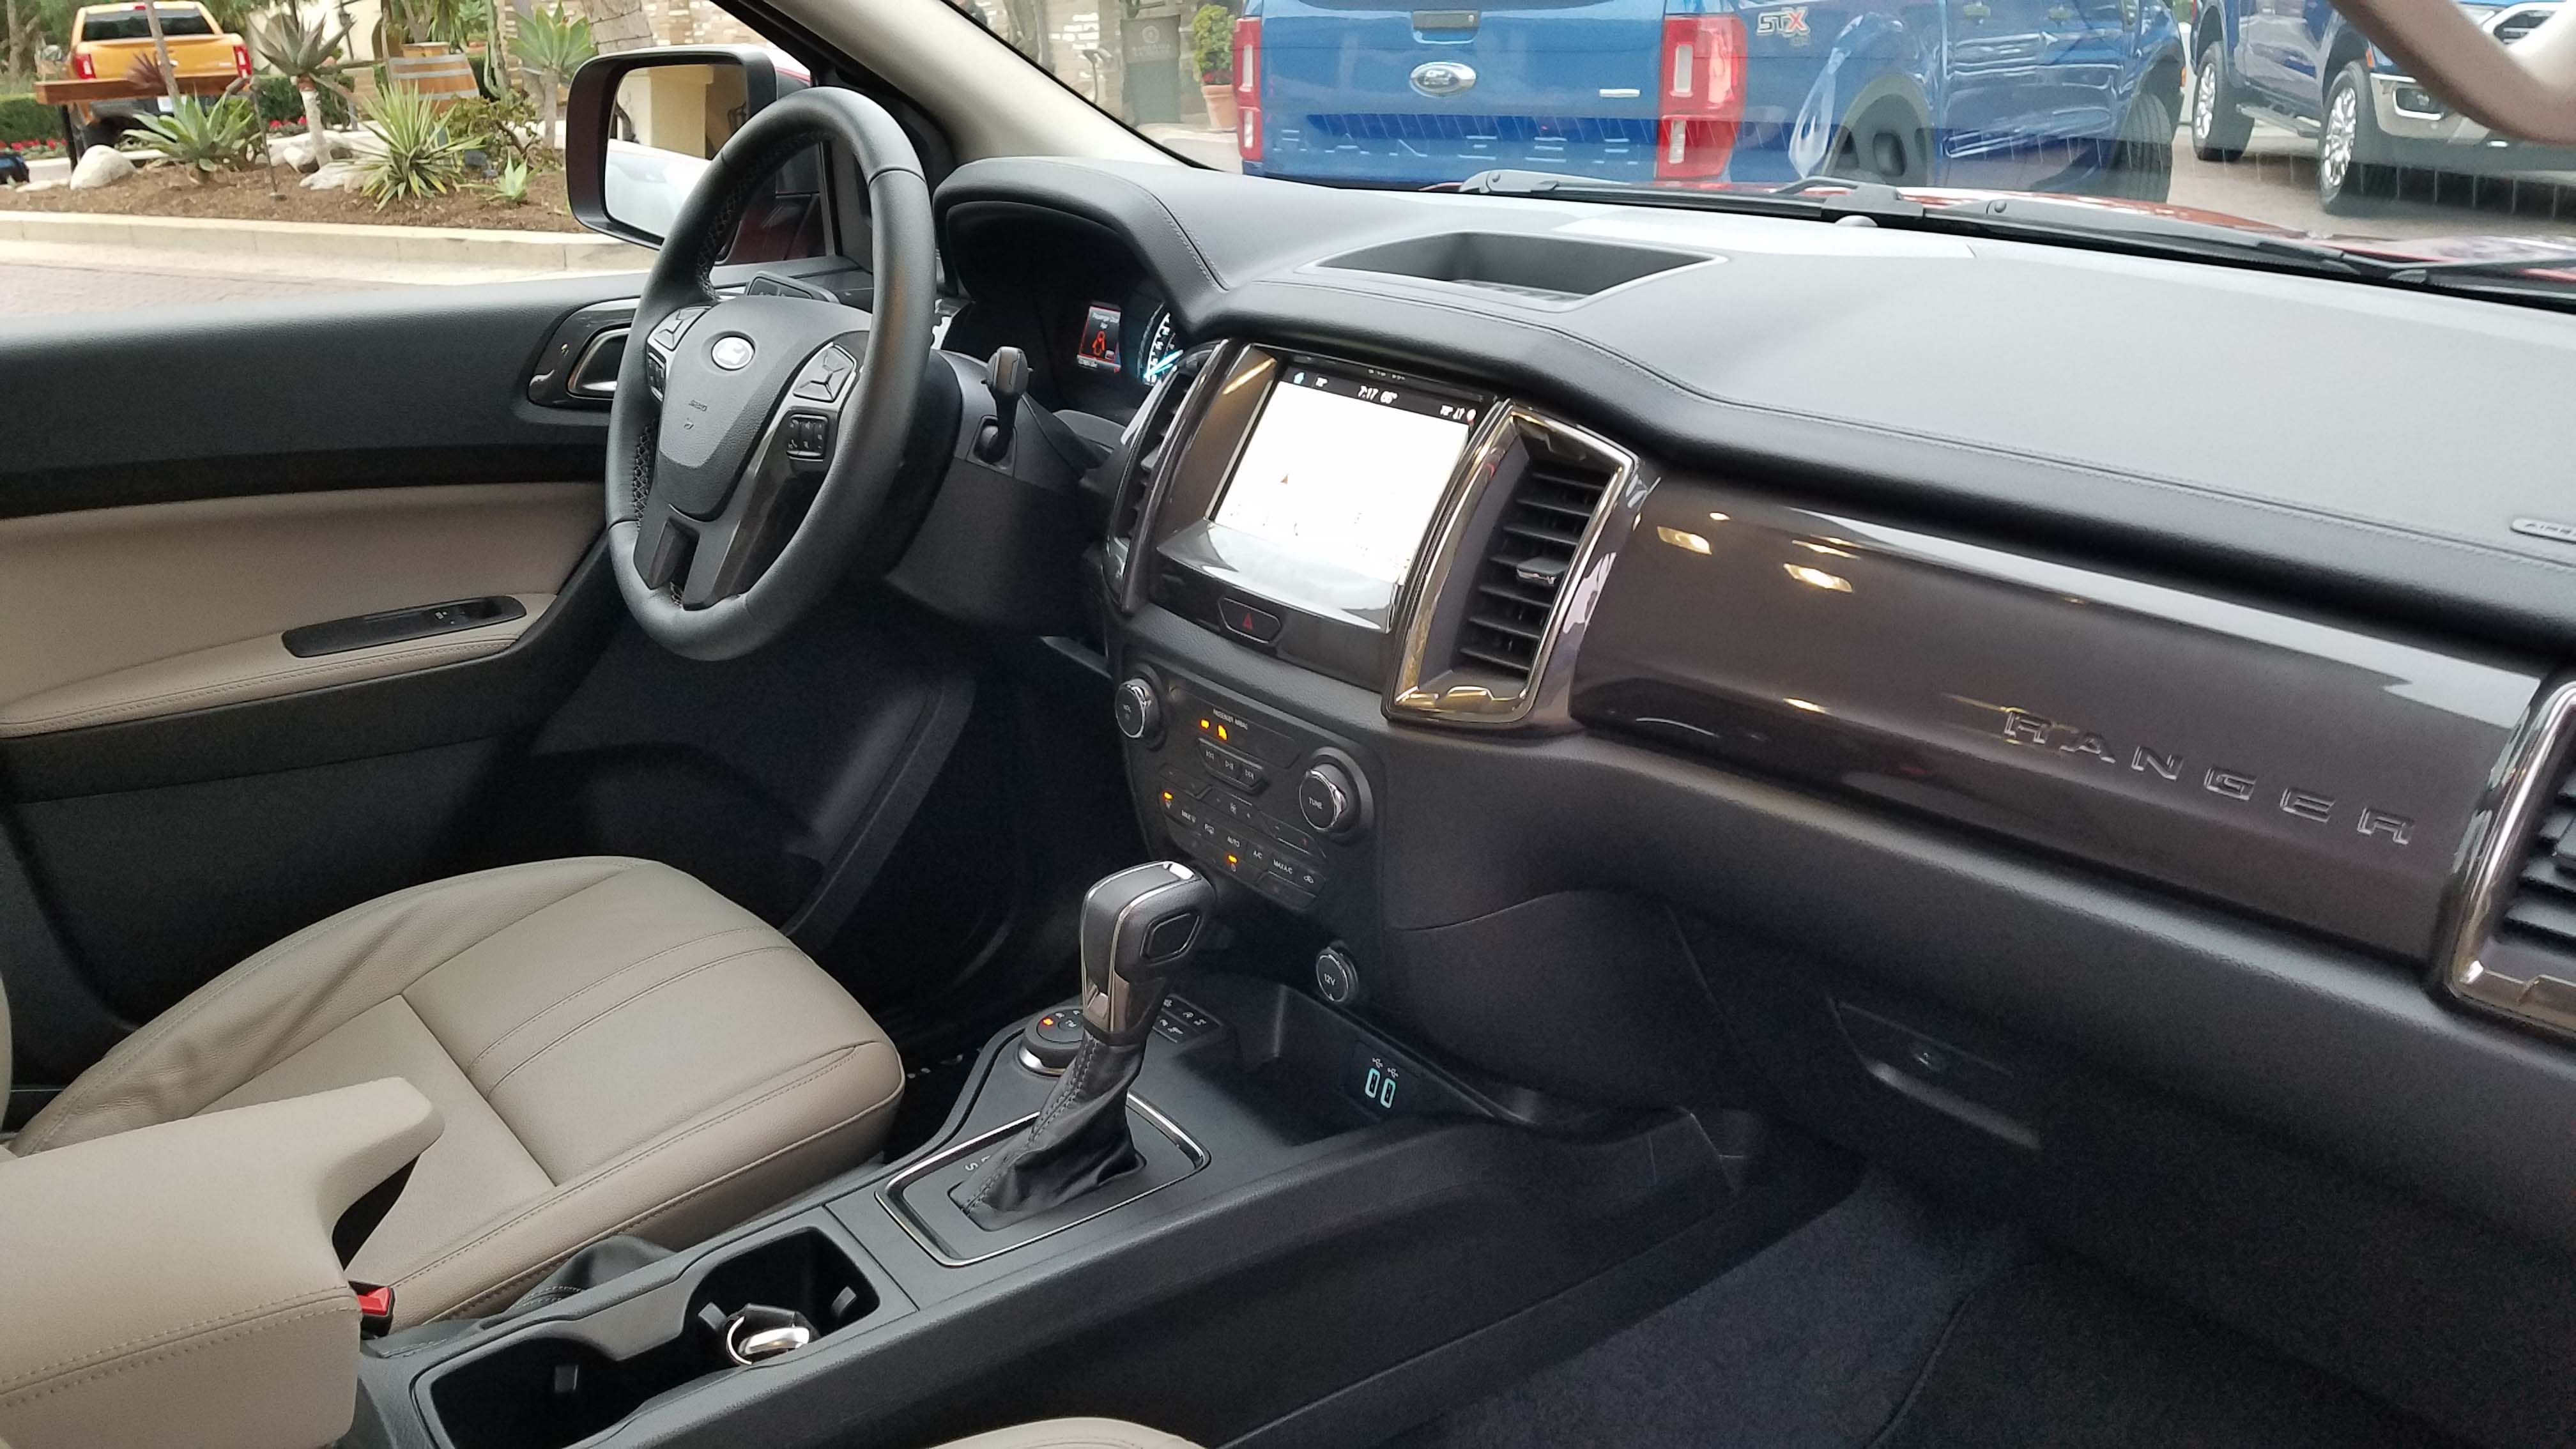 The interior of the 2019 Ford Ranger is upgraded with the latest SYNC 3 infotainment system with Apple CarPlay connectivity. The interior is heavy with plastic, Ford says, for the customer who wants to get it dirty off-road.